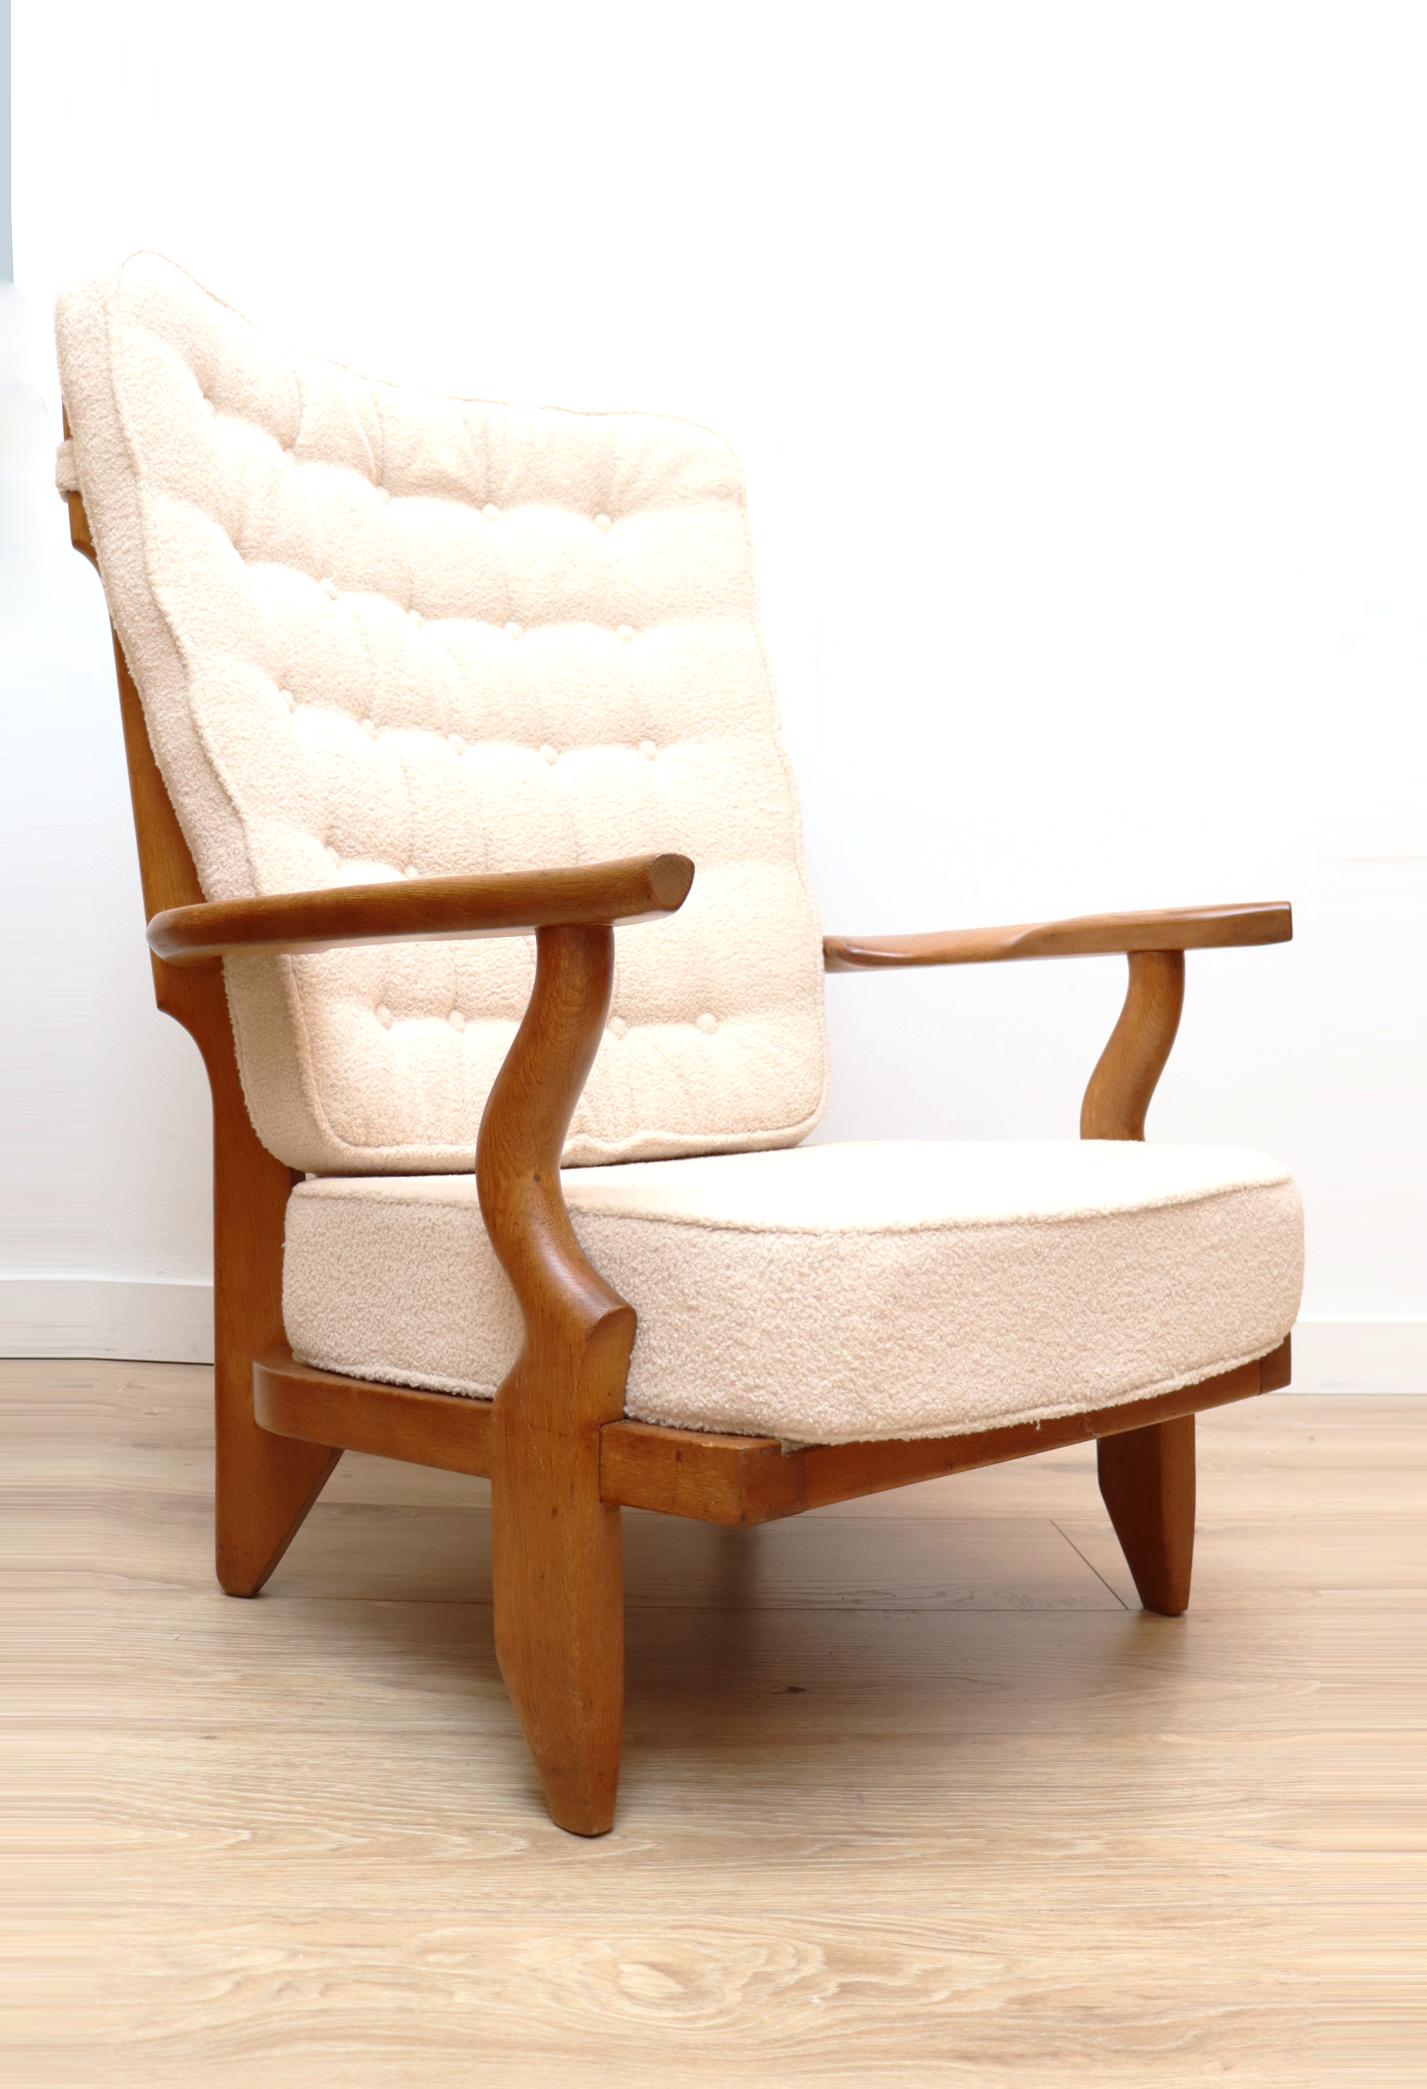 Pair of Oak Lounge Chairs Grand Repos by Guillerme et Chambron, France 1950 For Sale 8